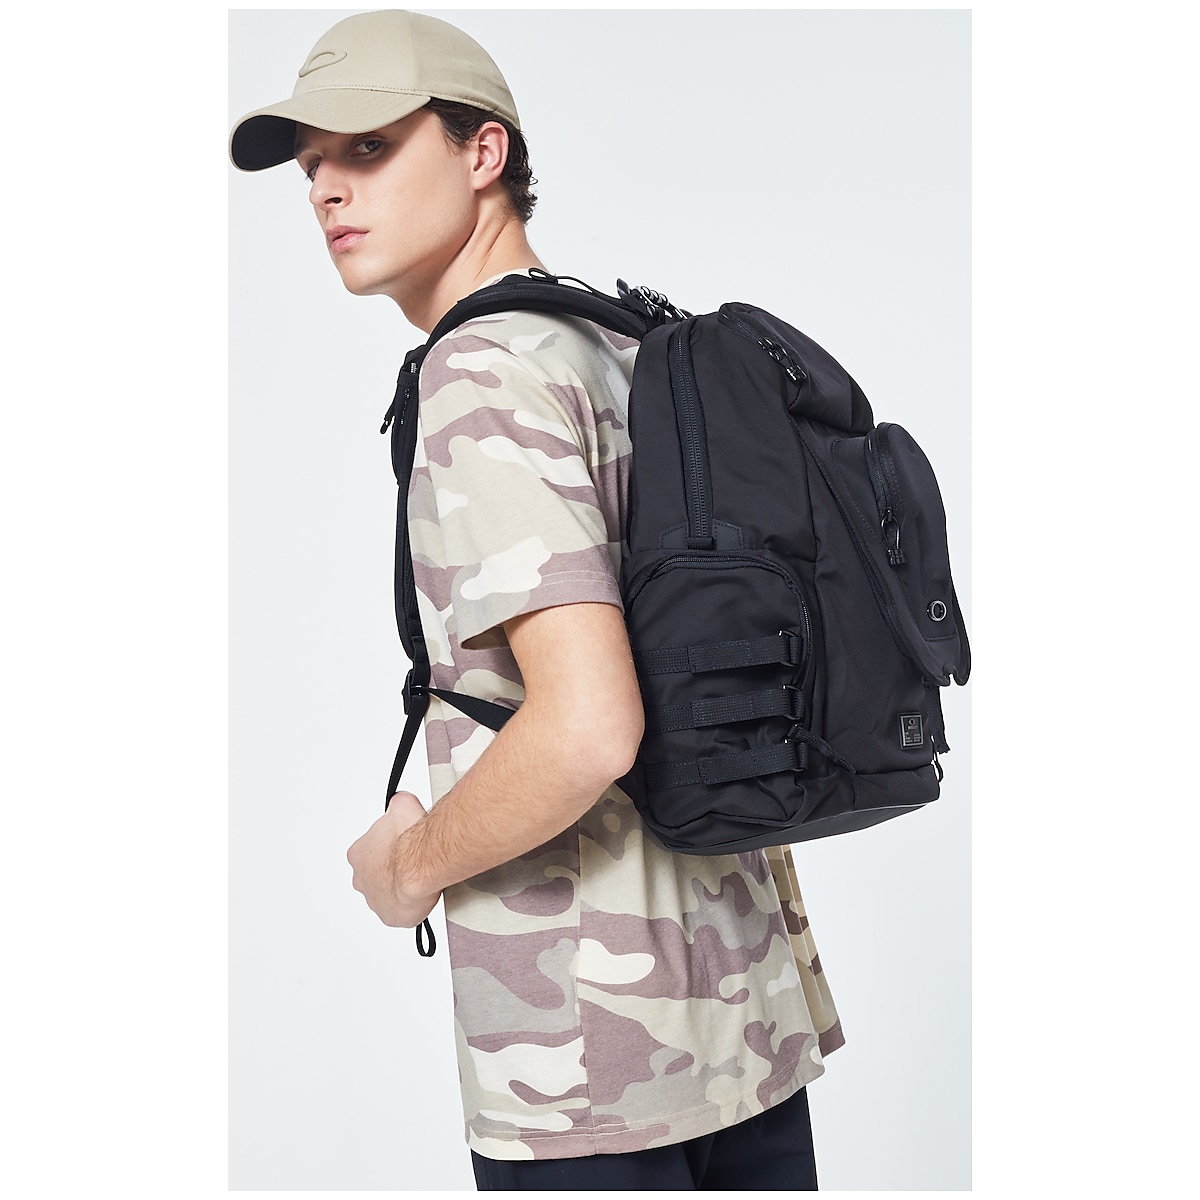 I am sick do an experiment teens Oakley Icon Backpack 2.0 - Blackout | Oakley US Store